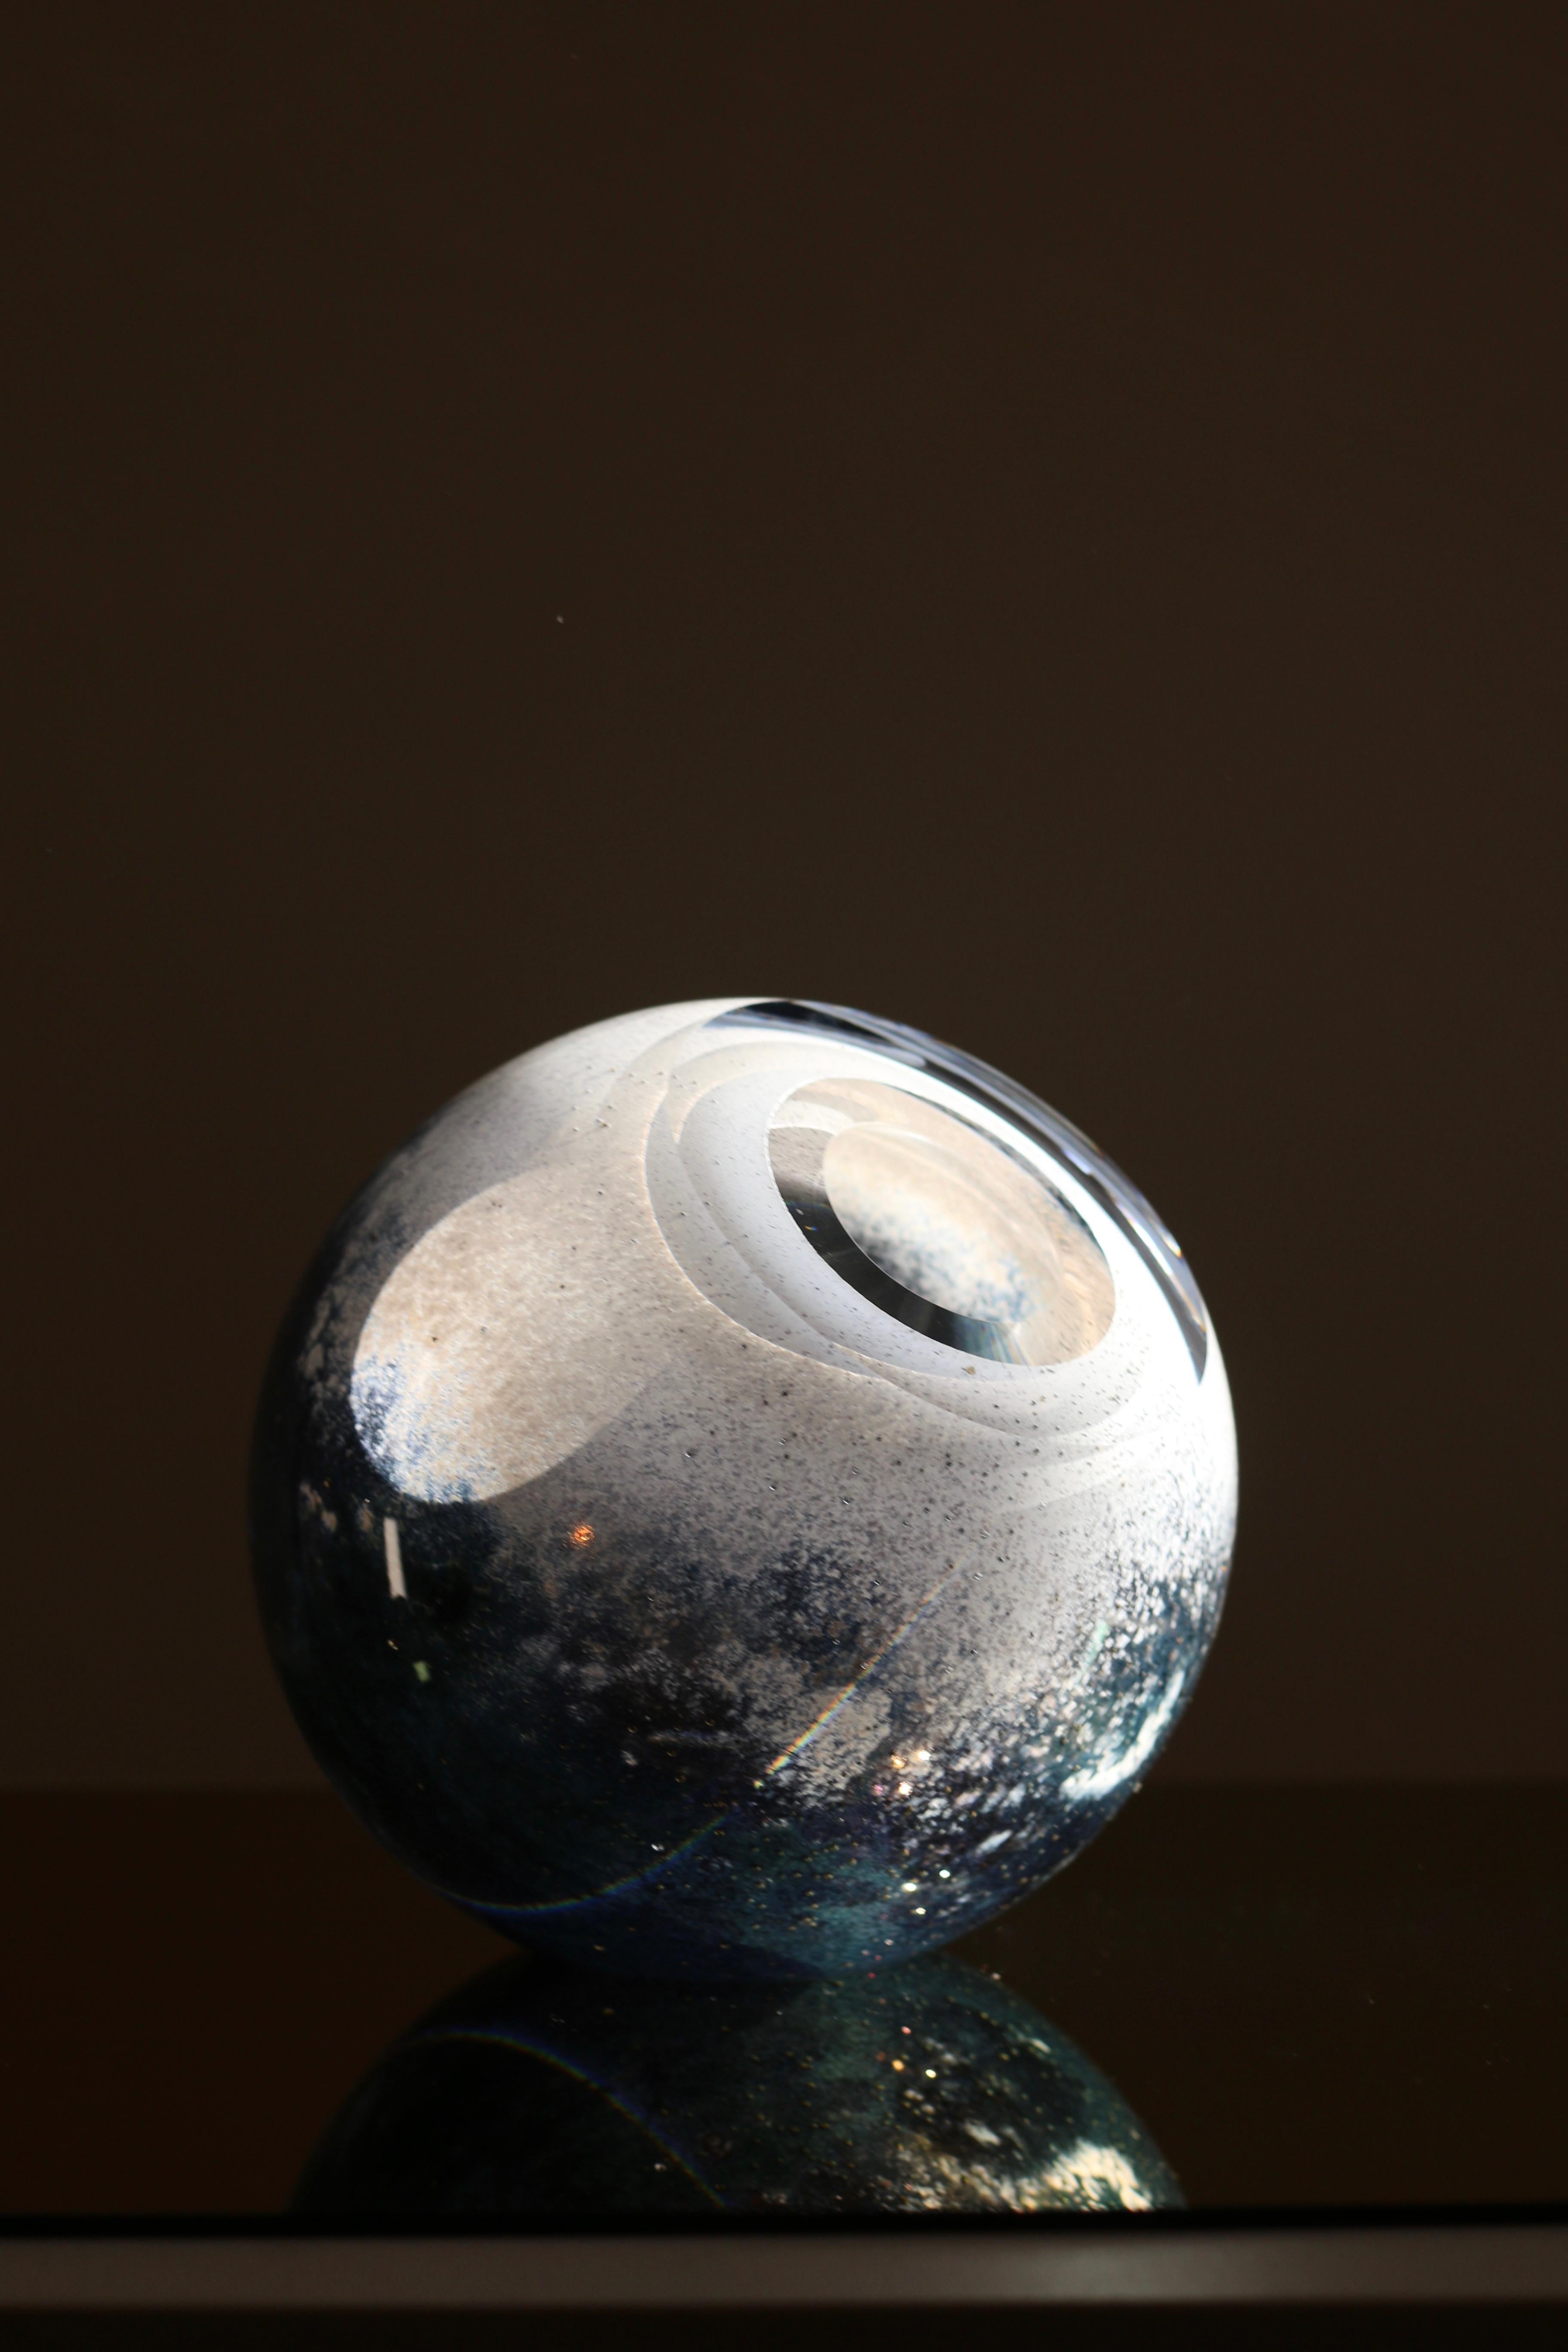 Round hand-shaped and mouth-blown glass vase in white and blue.
Extra-clear top quality and lustrous glass.
Handmade by a team of highly skilled craftsmen. 
This contemporary small scale sculpture is a unique piece from collection Experimental.